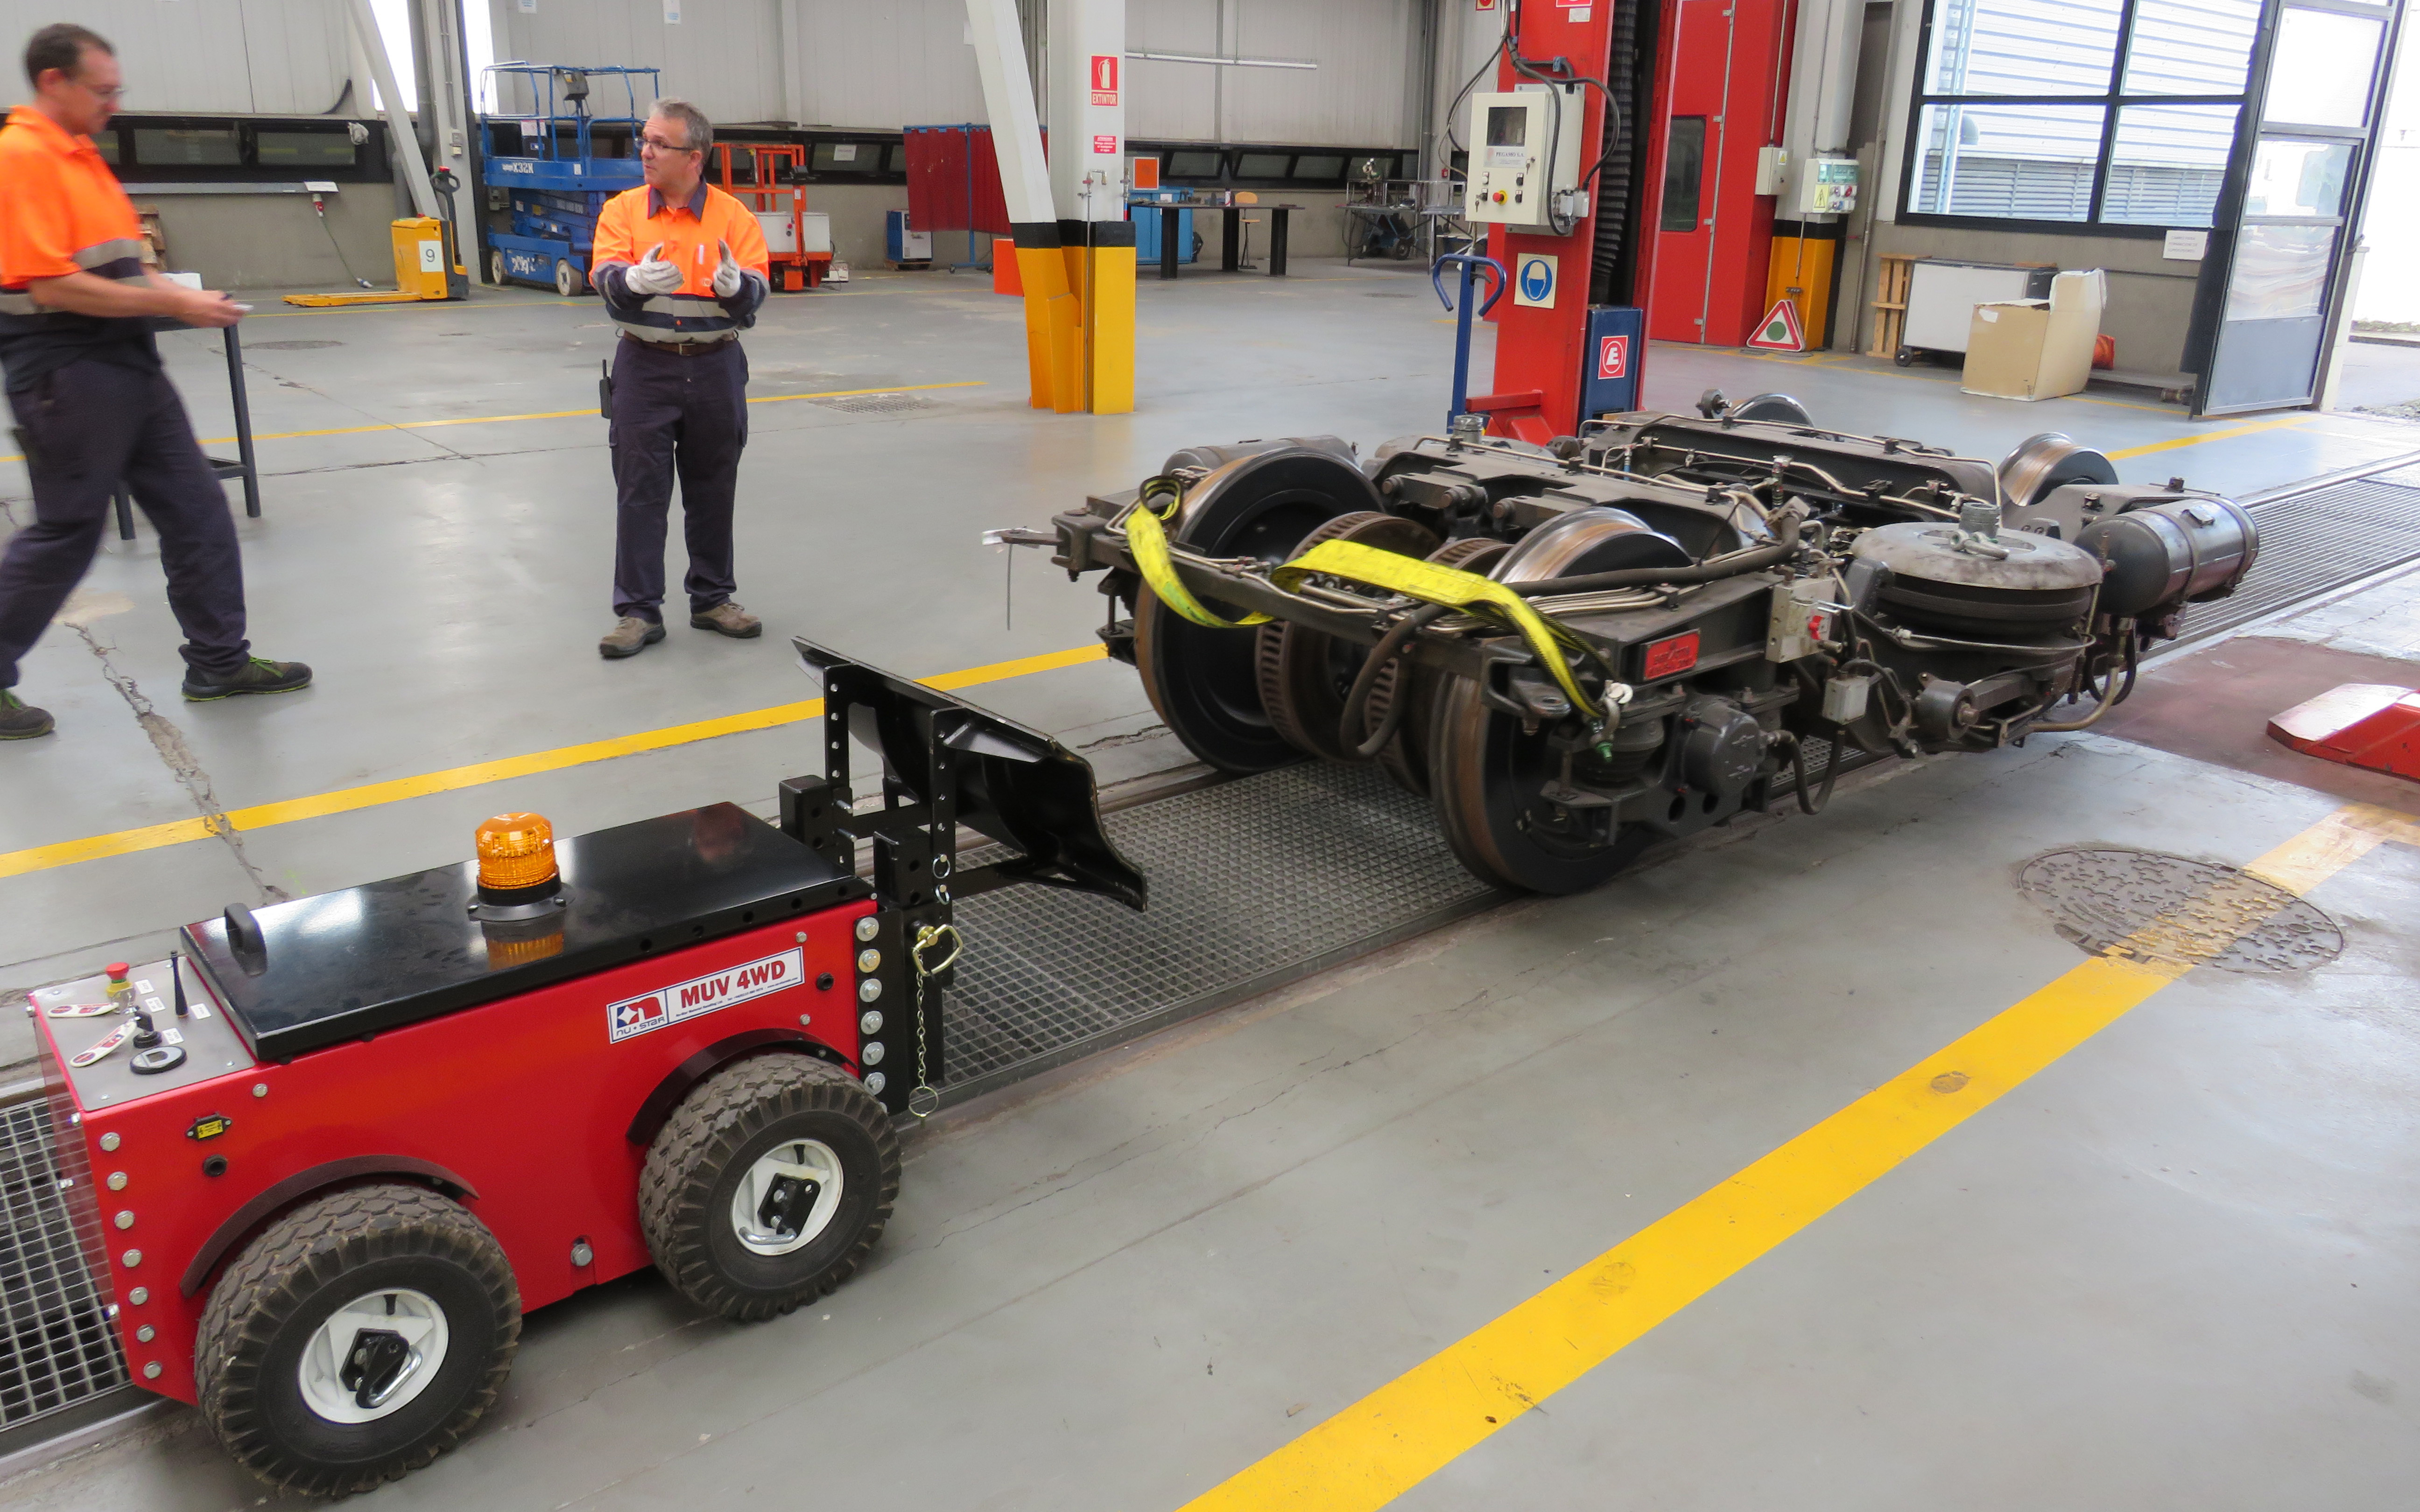 Radio controlled MUV 4WD electric tug being used for moving metro rail bogies in maintenance workshop